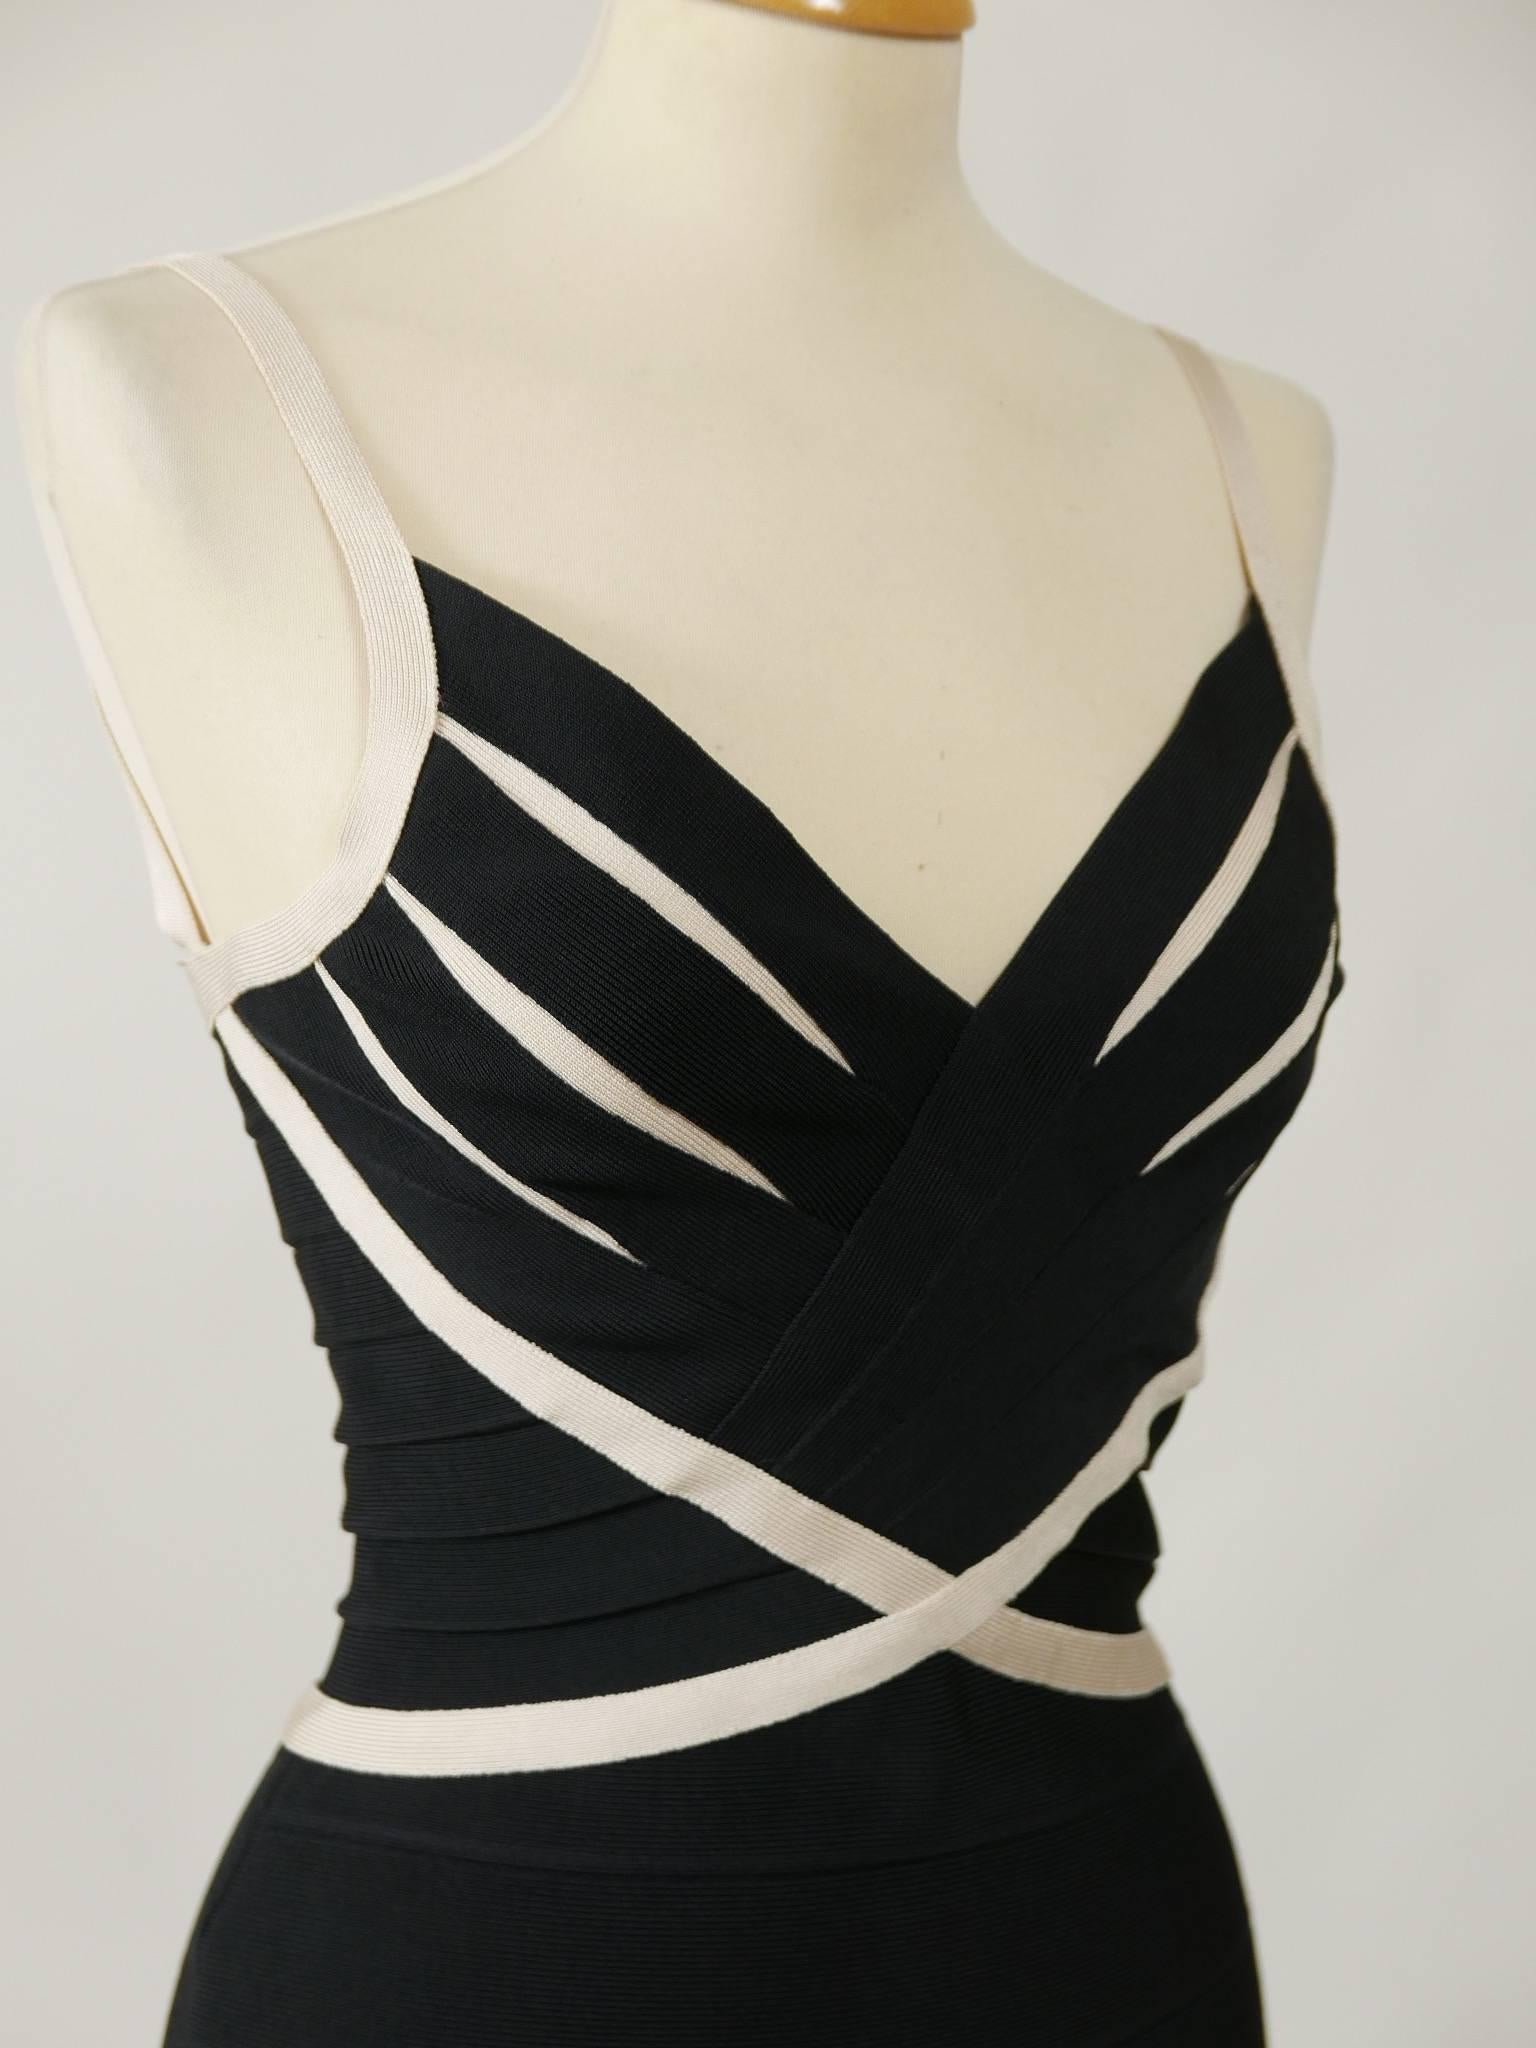 Women's Herve Leger Couture Black and White Bandage Hourglass Dress